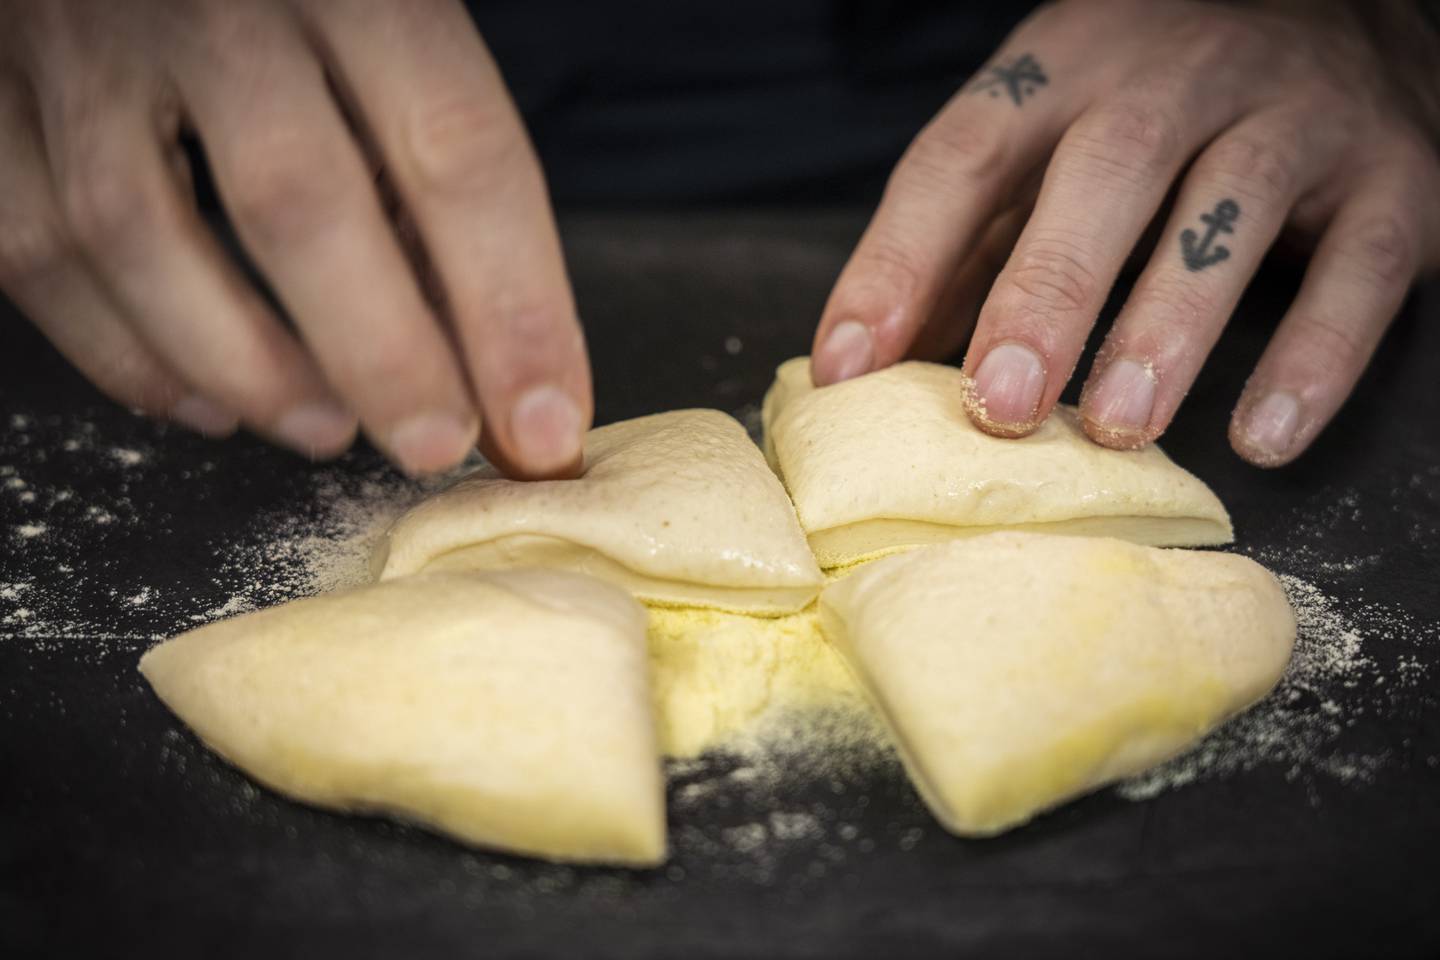 After folding the dough, close the edges by pressing with a fork along the entire seam.